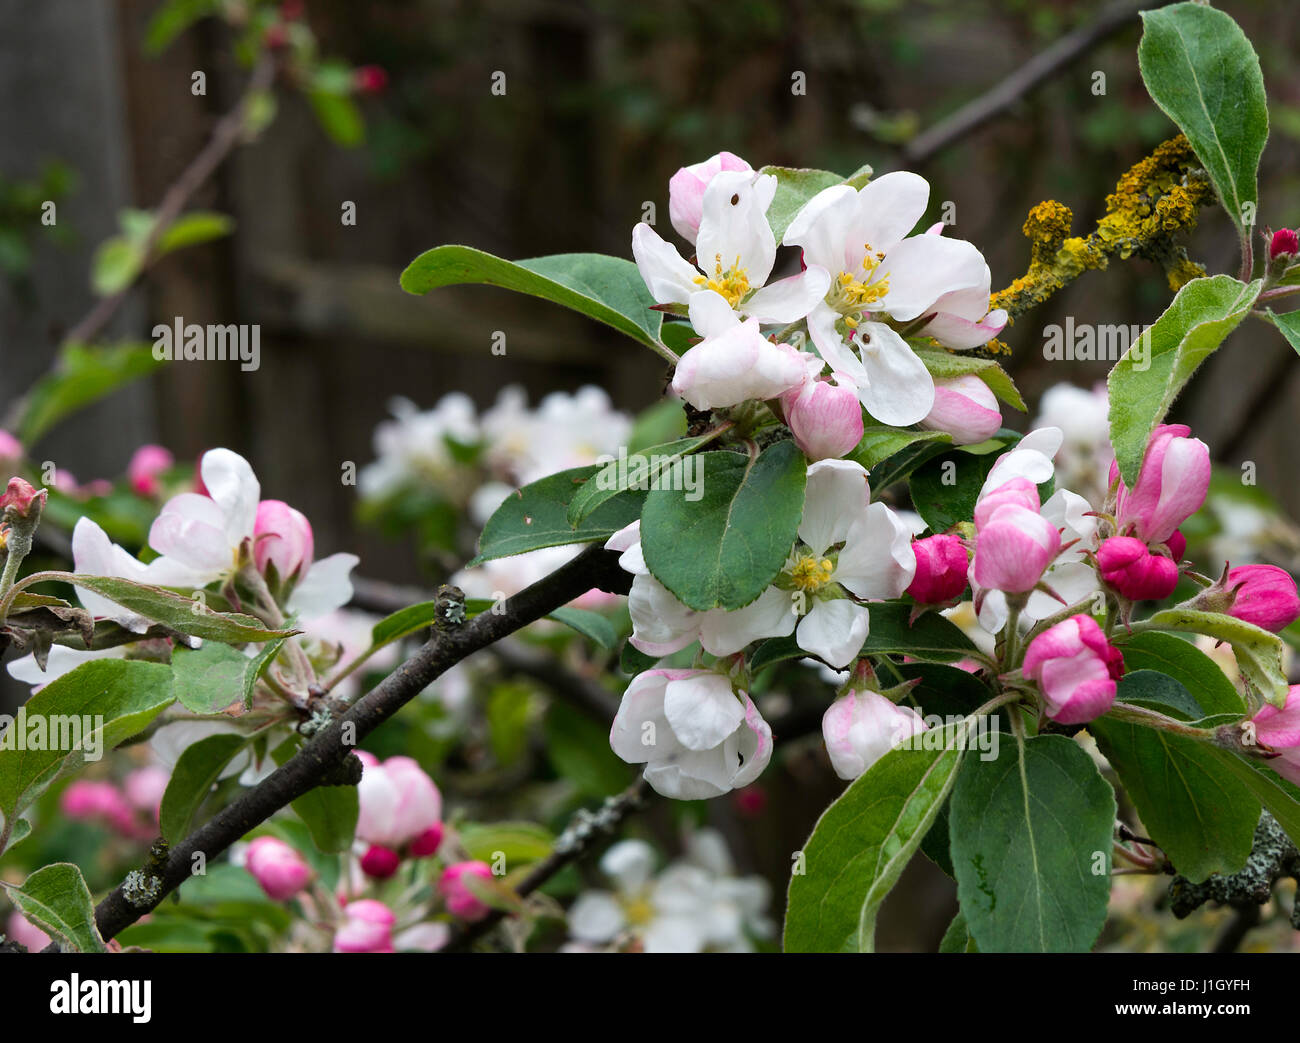 Beautiful Crabapple Blossom on a Crab Apple Tree in a Garden in Alsager Cheshire England United Kingdom UK Stock Photo